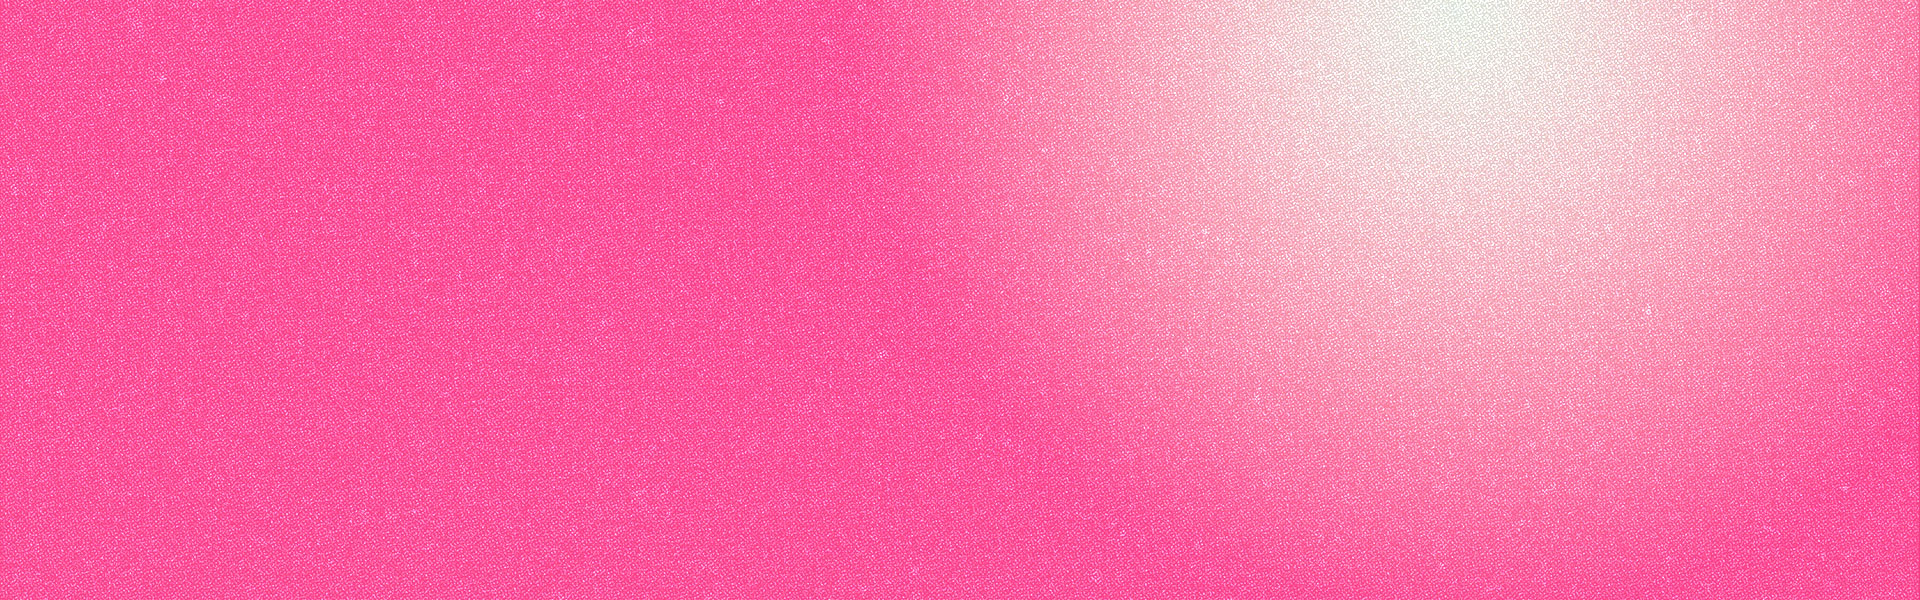 Abstract image that is magenta with a slight texture.